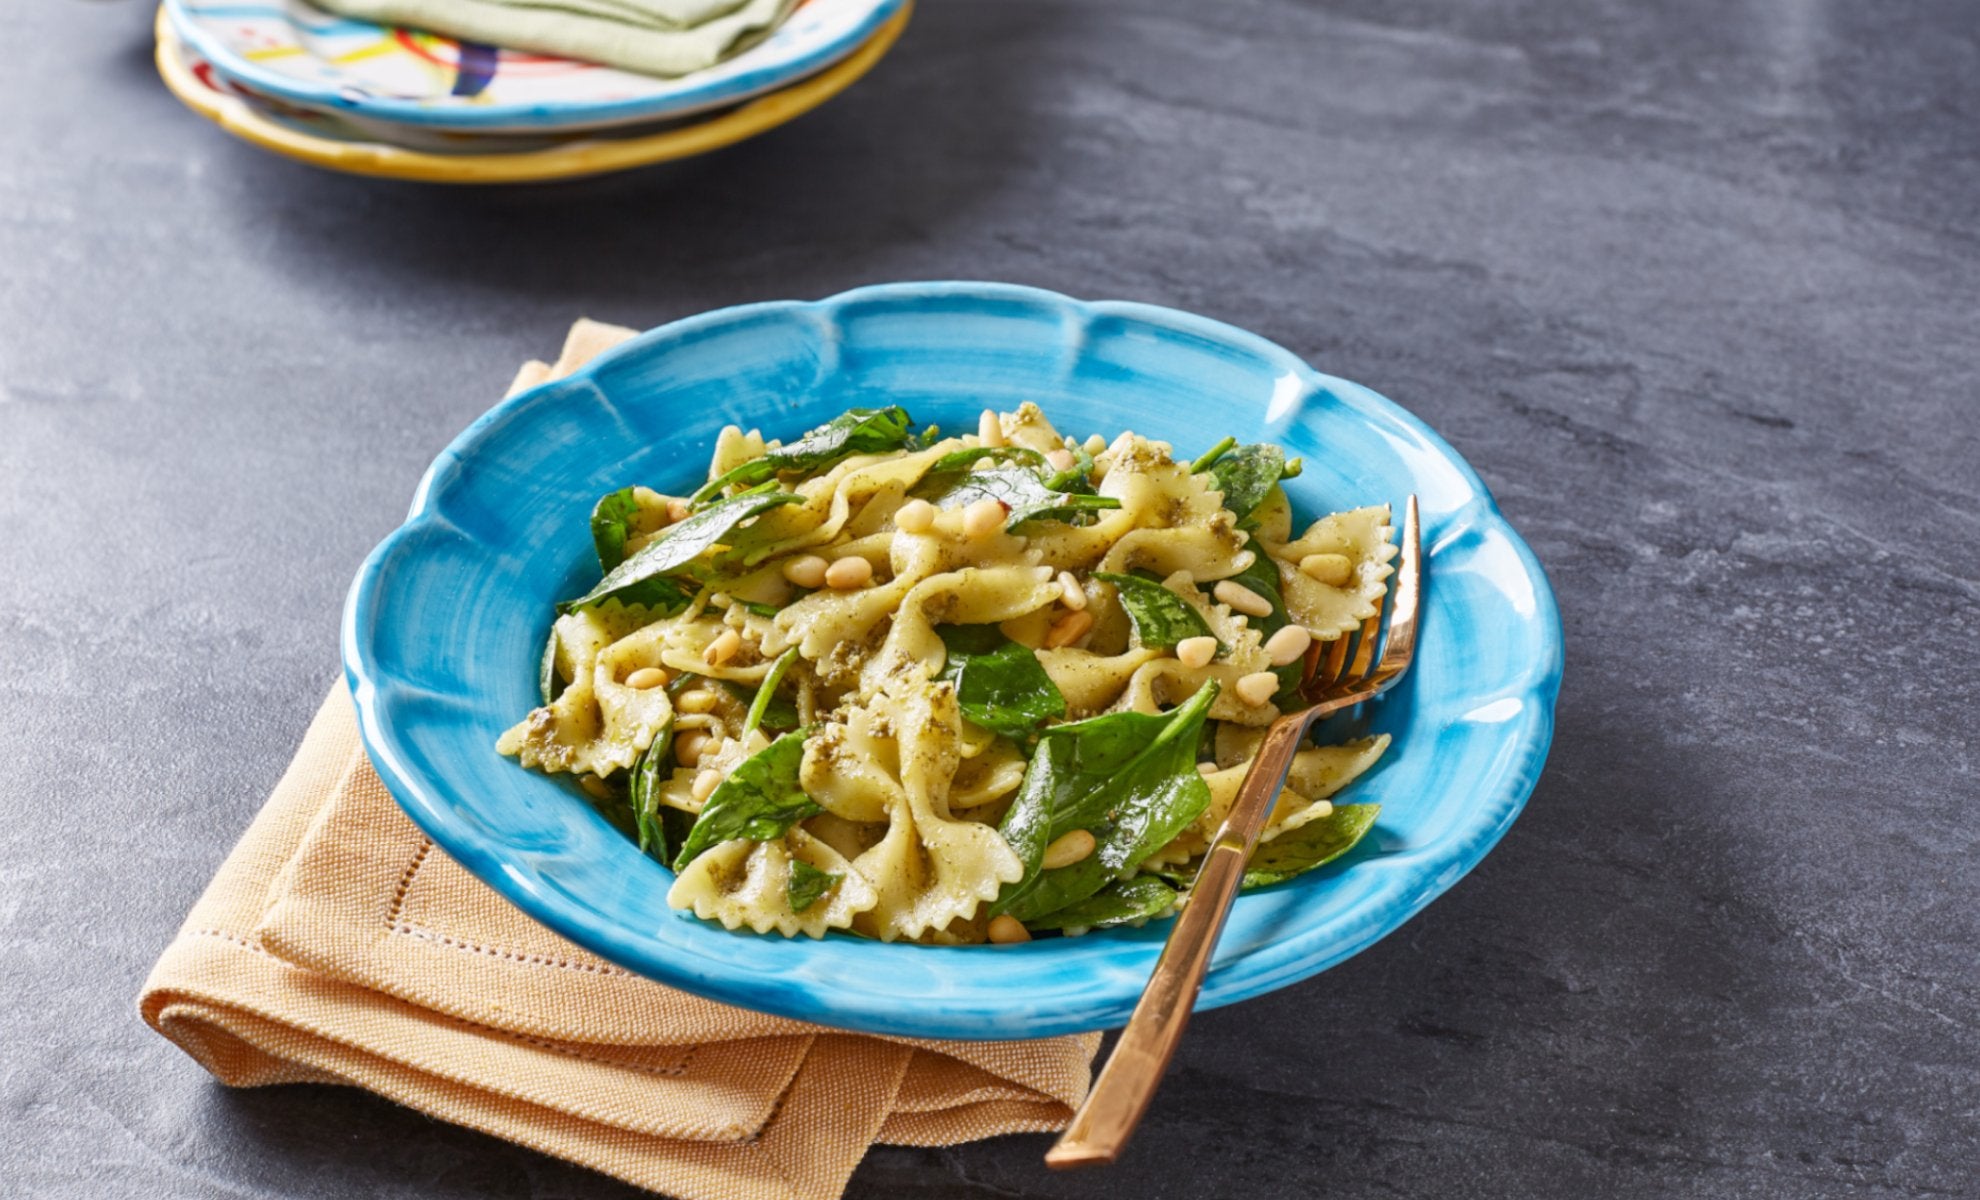 bowl of vegan pesto pasta with spinach and pine nuts by Sacla'